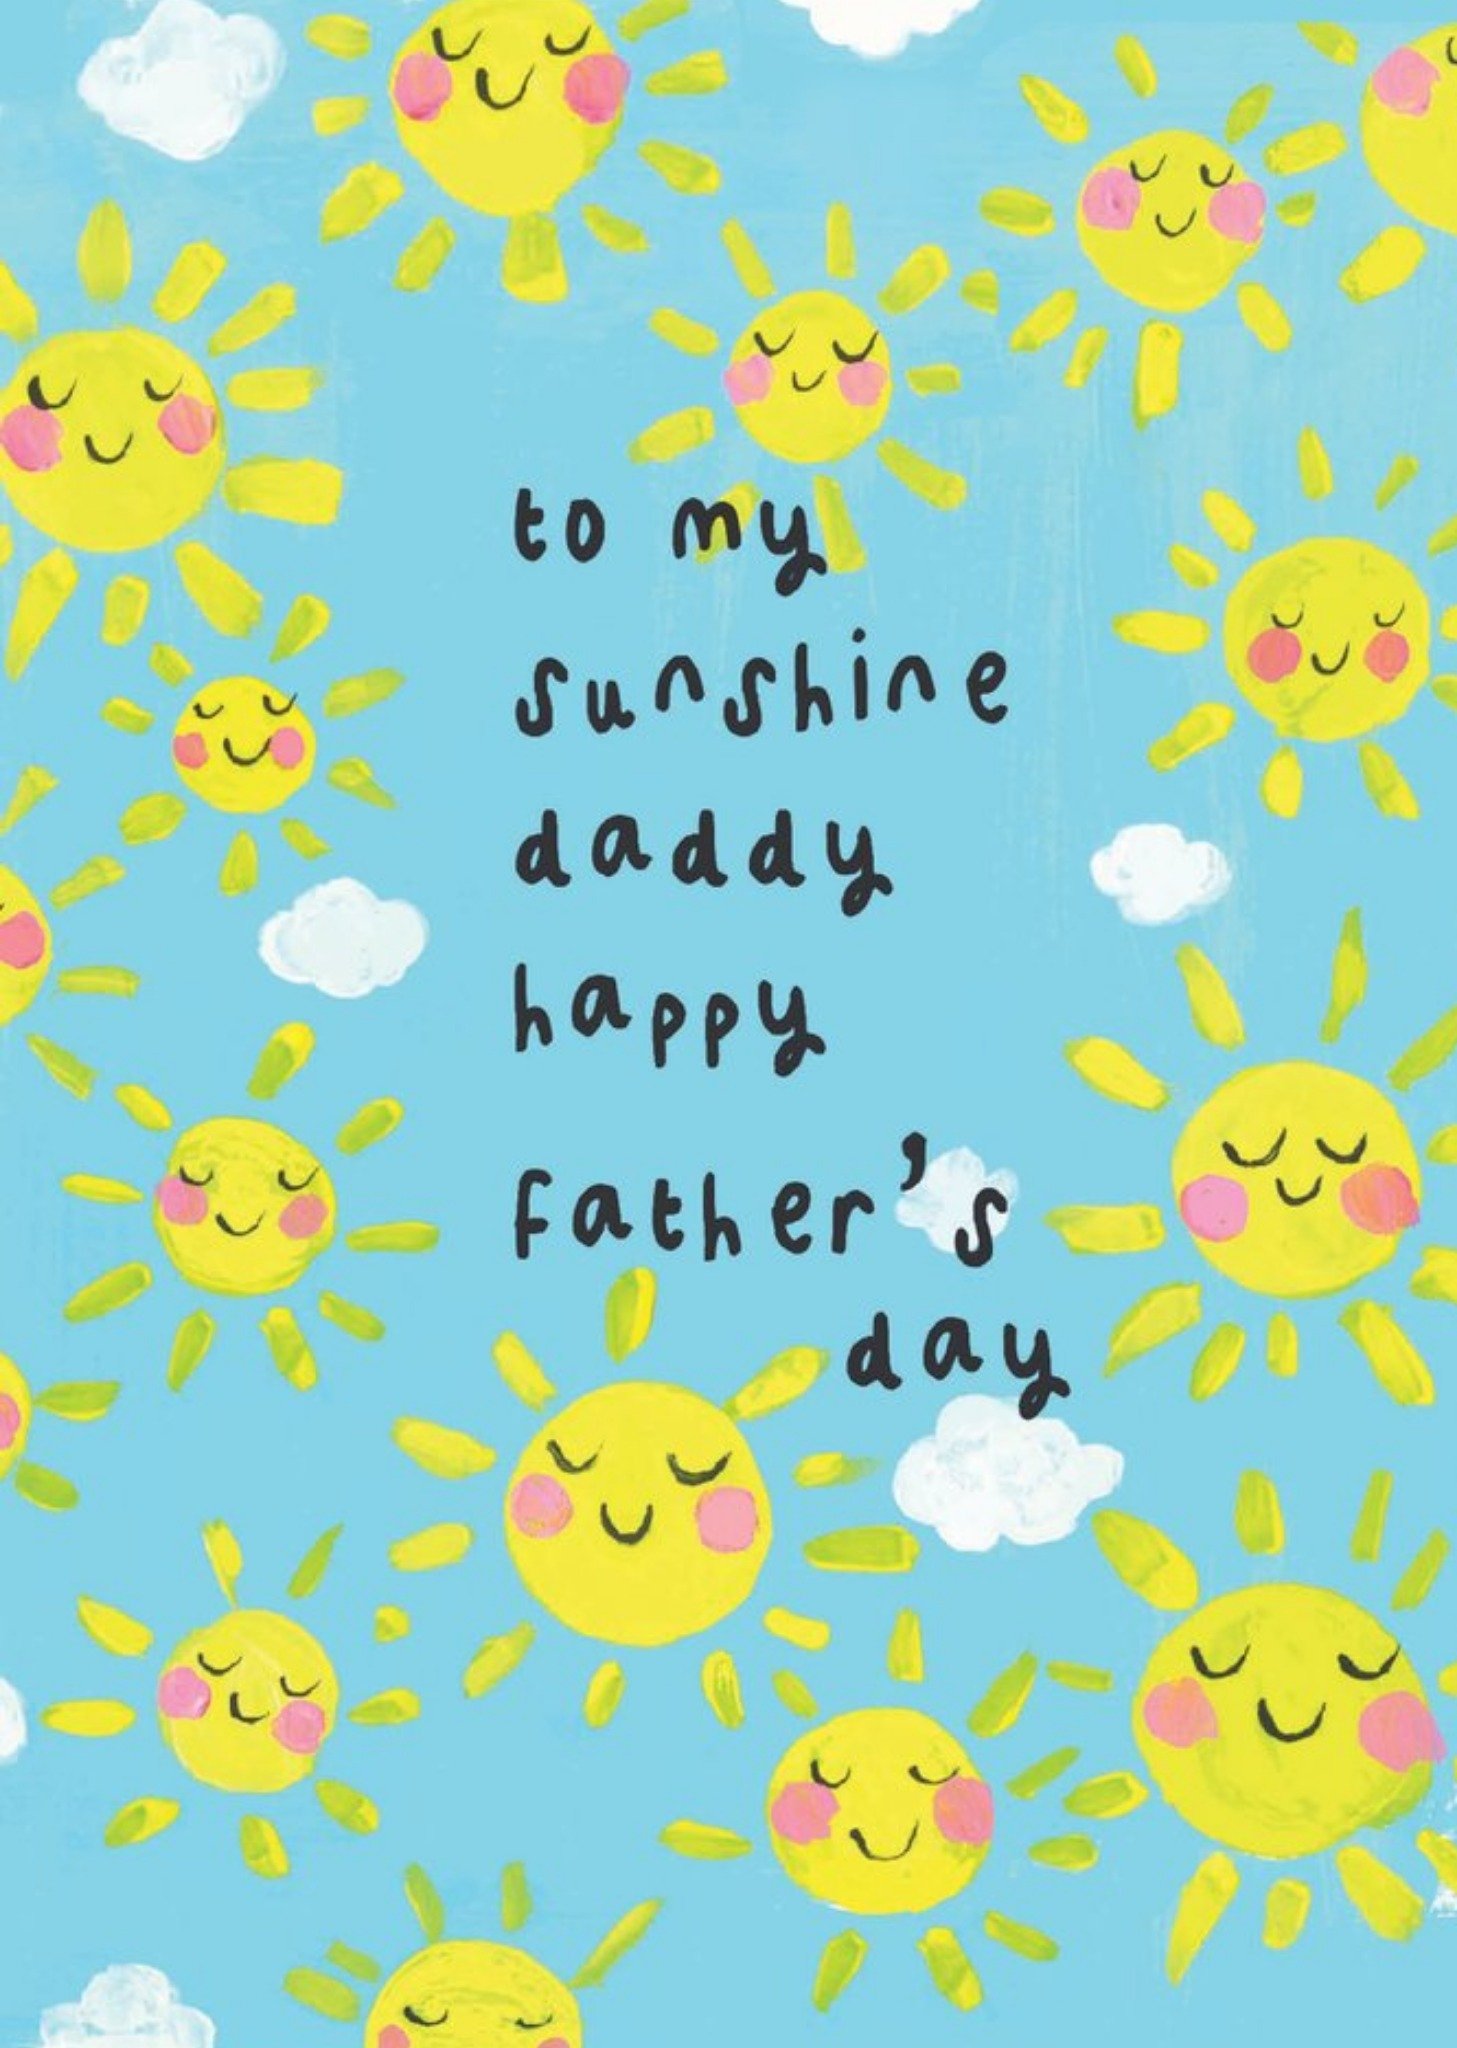 Sooshichacha Child Like Painting Of Smiling Suns With Handwritten Typography Father's Day Card Ecard